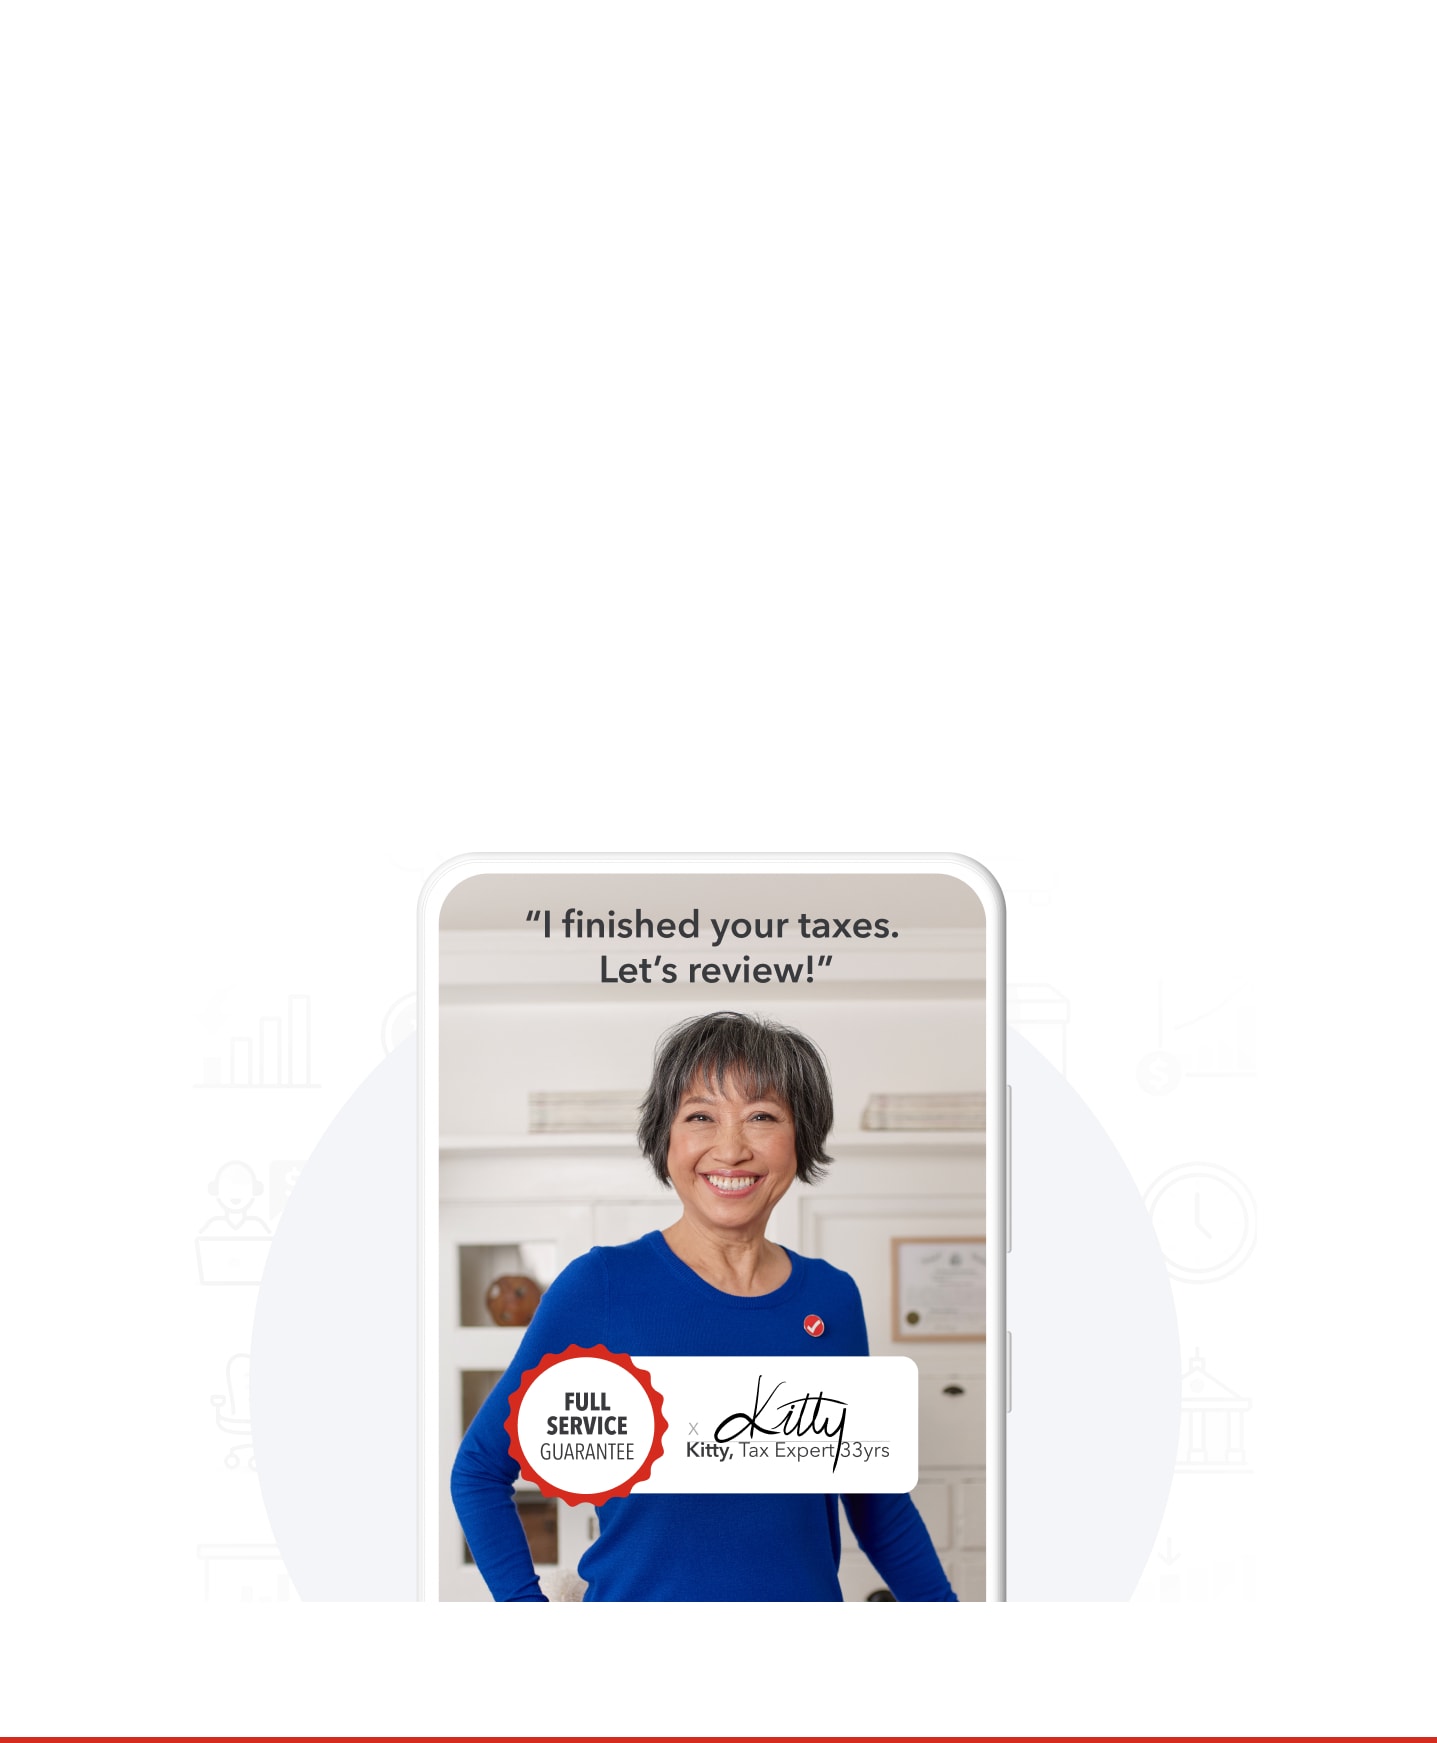 TurboTax expert Kitty has 33 years’ experience and smiles on a phone screen with a Full Service Guarantee badge. She says “I finished your taxes. Let’s review!”